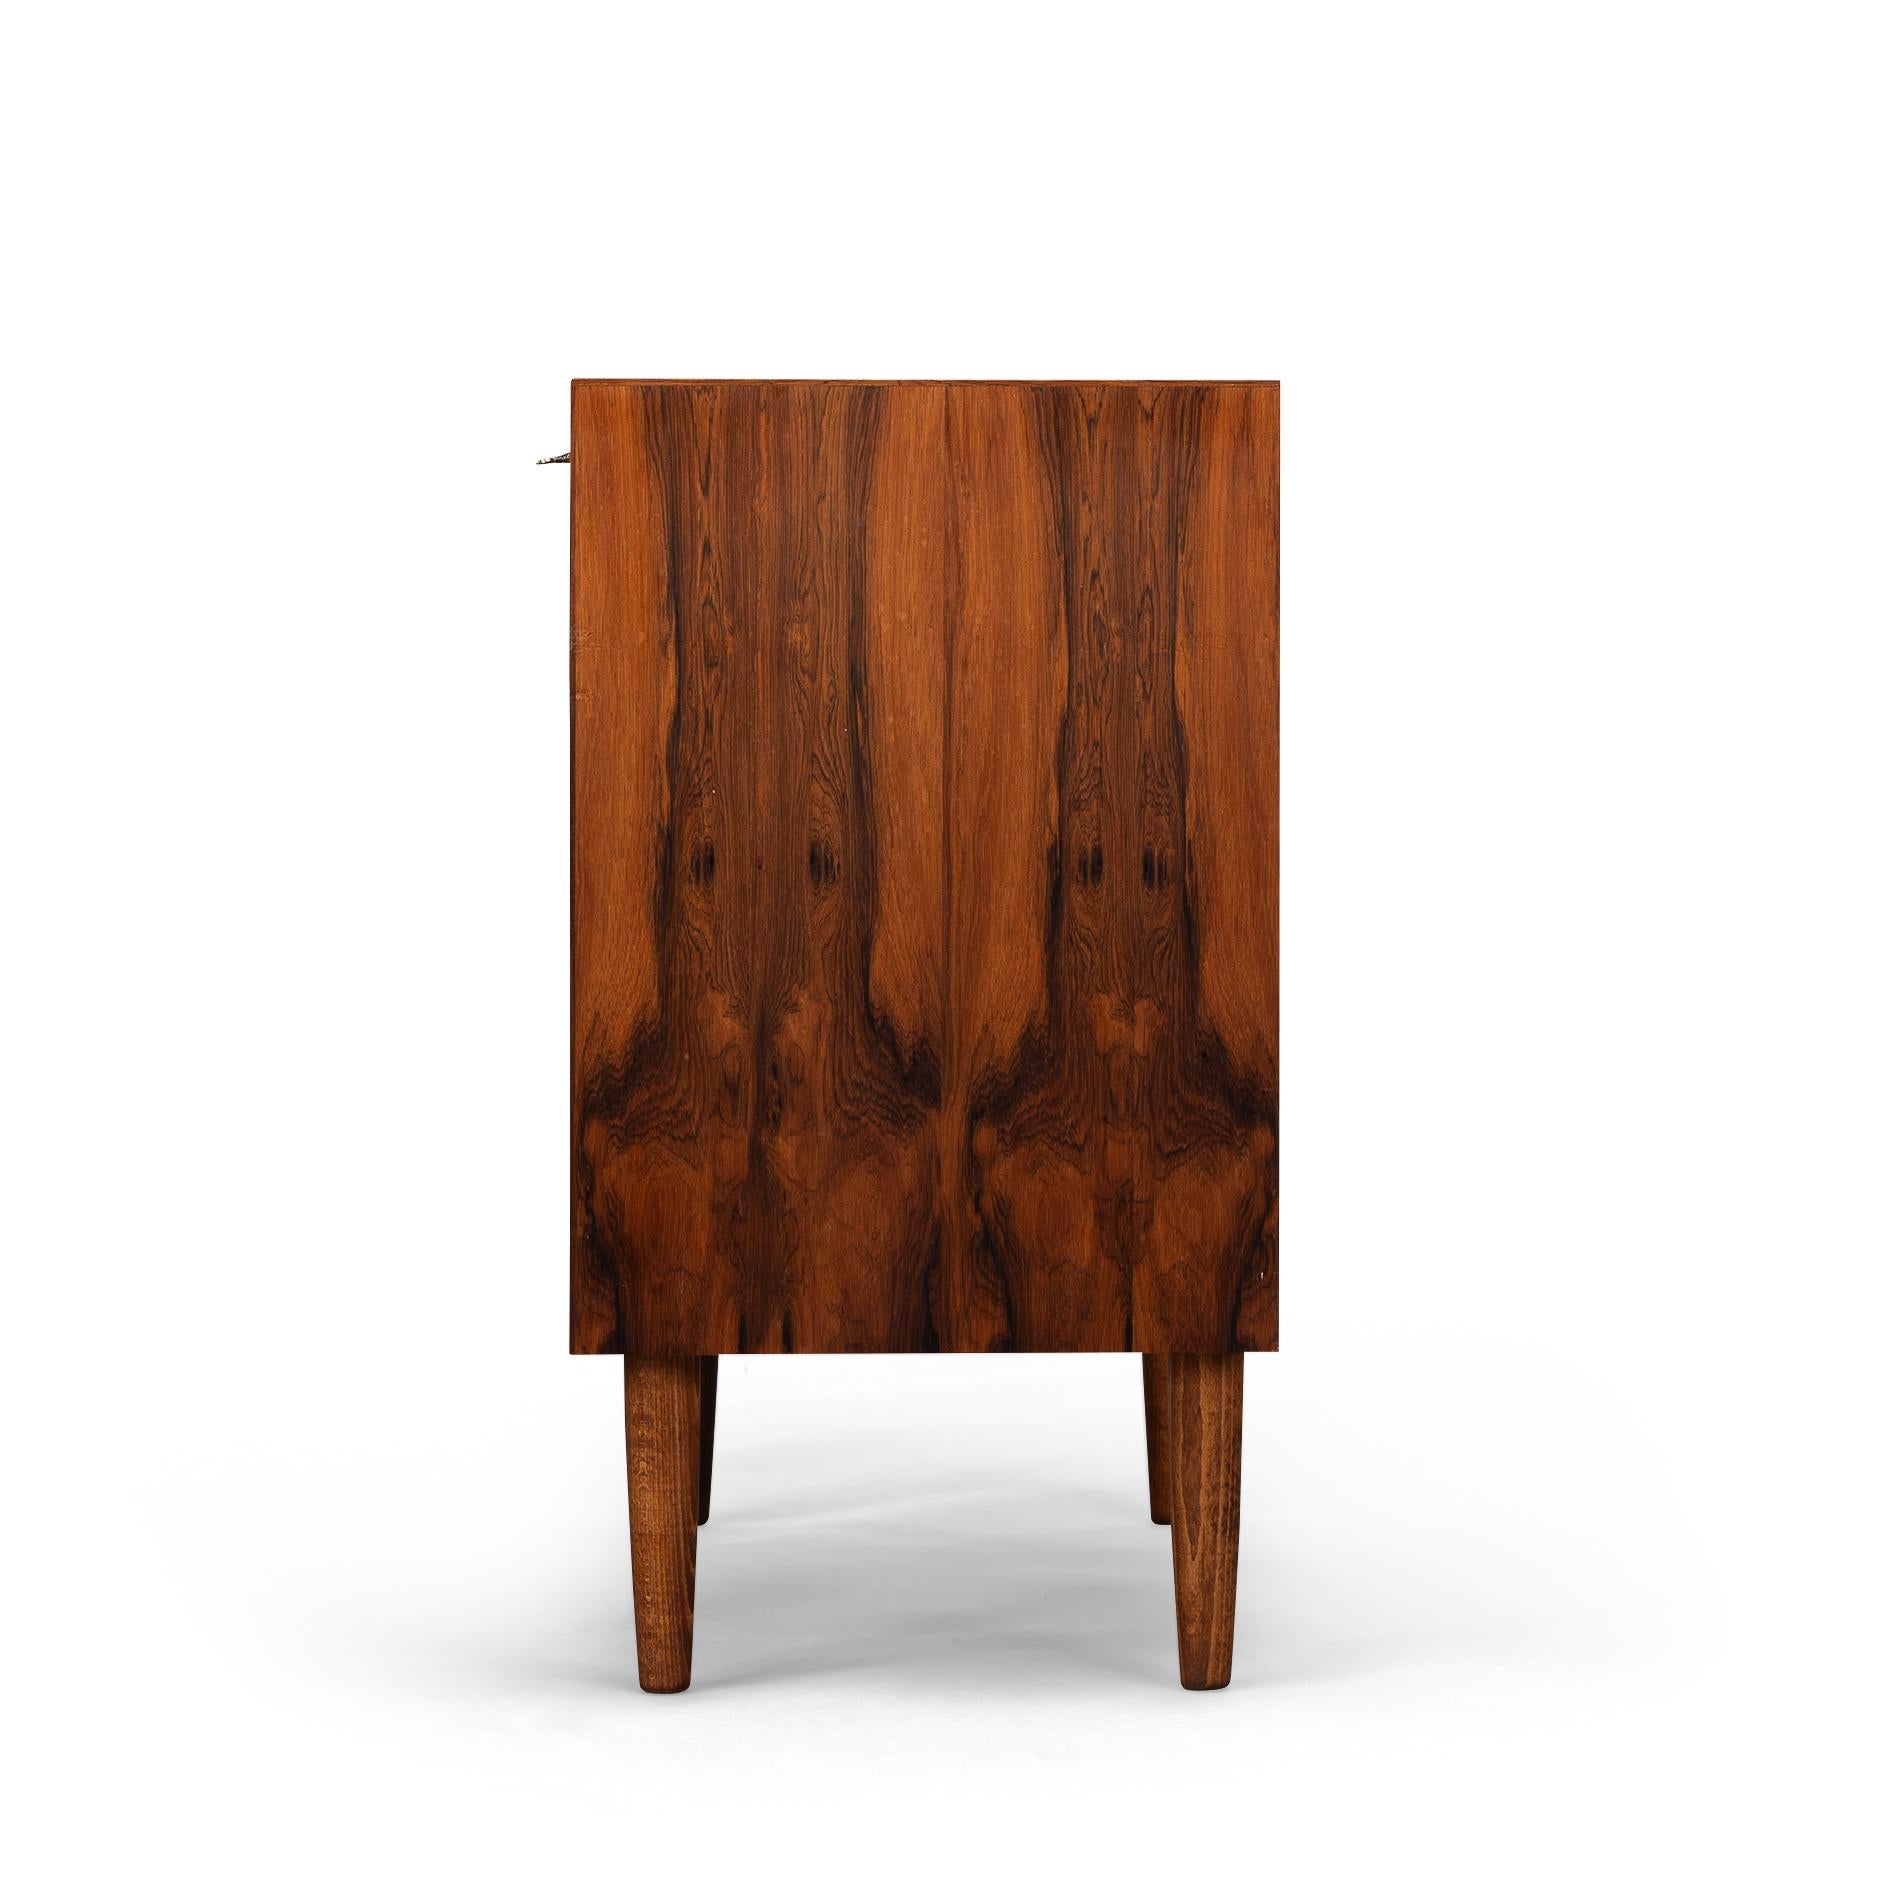 Danish Design : Chest of Drawers
Introducing an exquisite vintage chest of drawers from the 1960s, a true embodiment of timeless design and craftsmanship. This piece, a harmonious collaboration between renowned designer Erik Jensen and esteemed